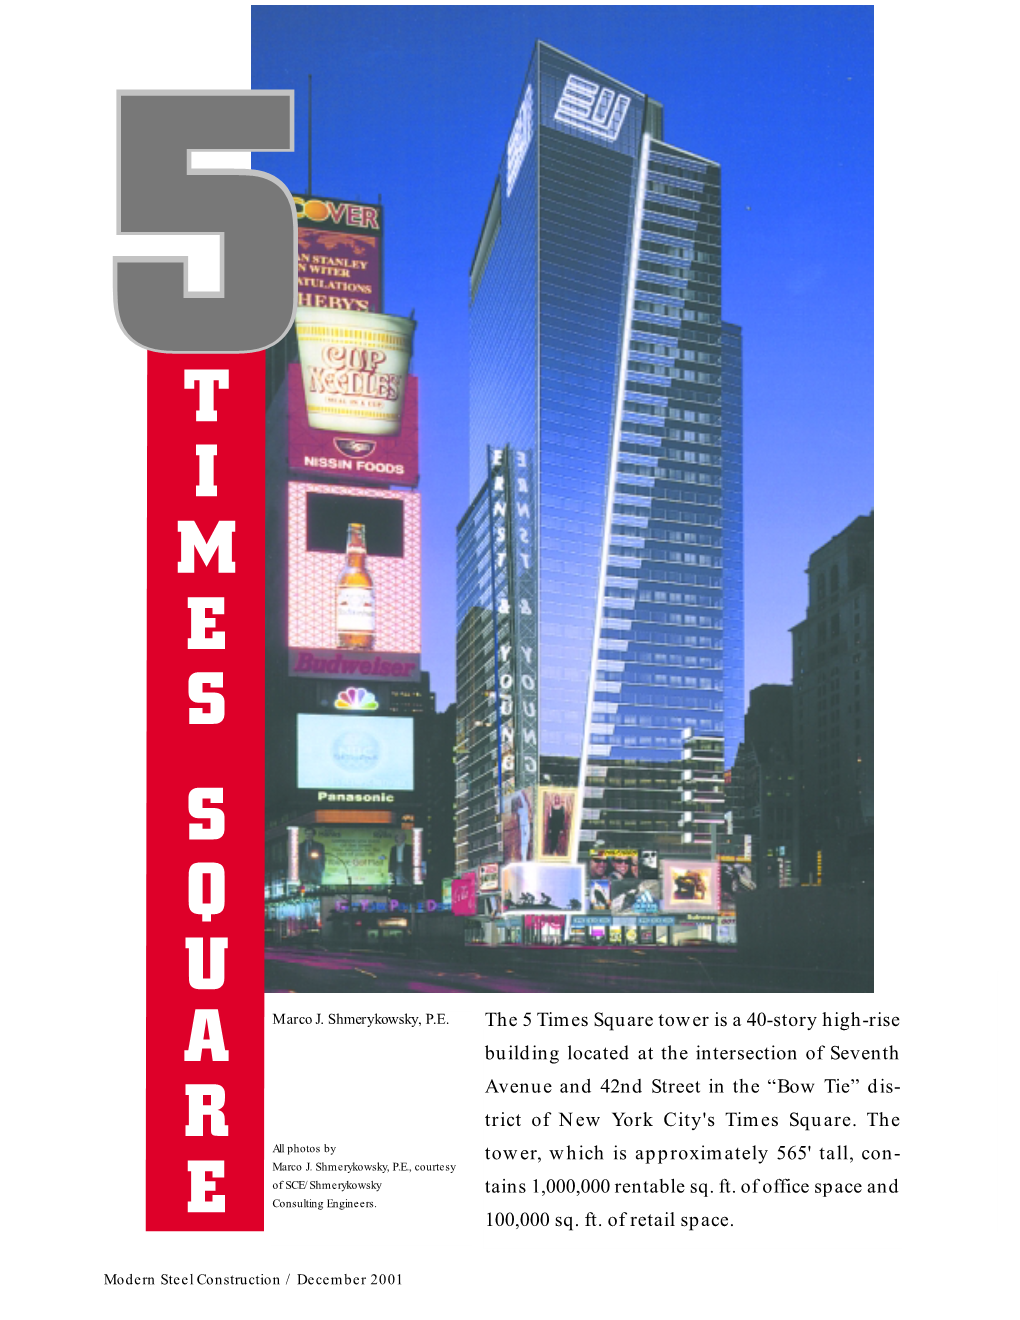 The 5 Times Square Tower Is a 40-Story High-Rise Building Located